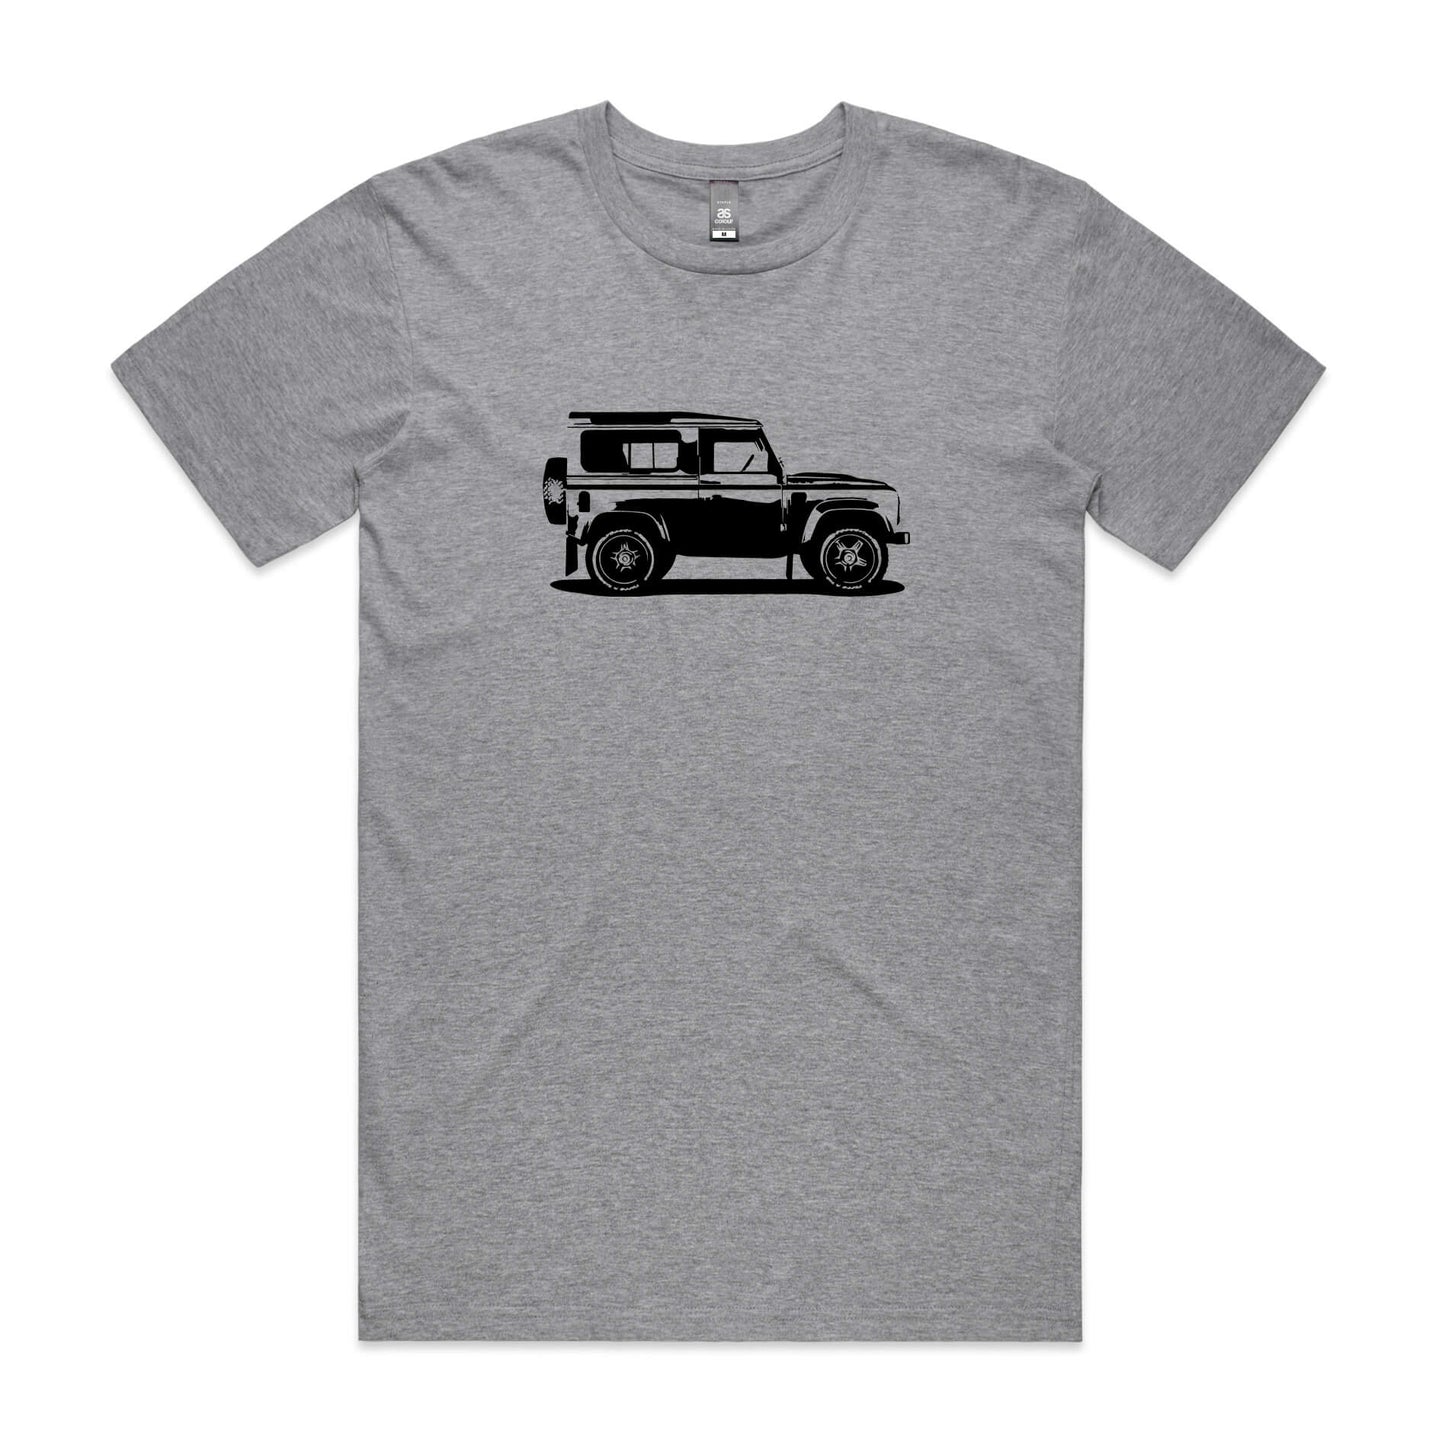 Land Rover Defender t-shirt in grey